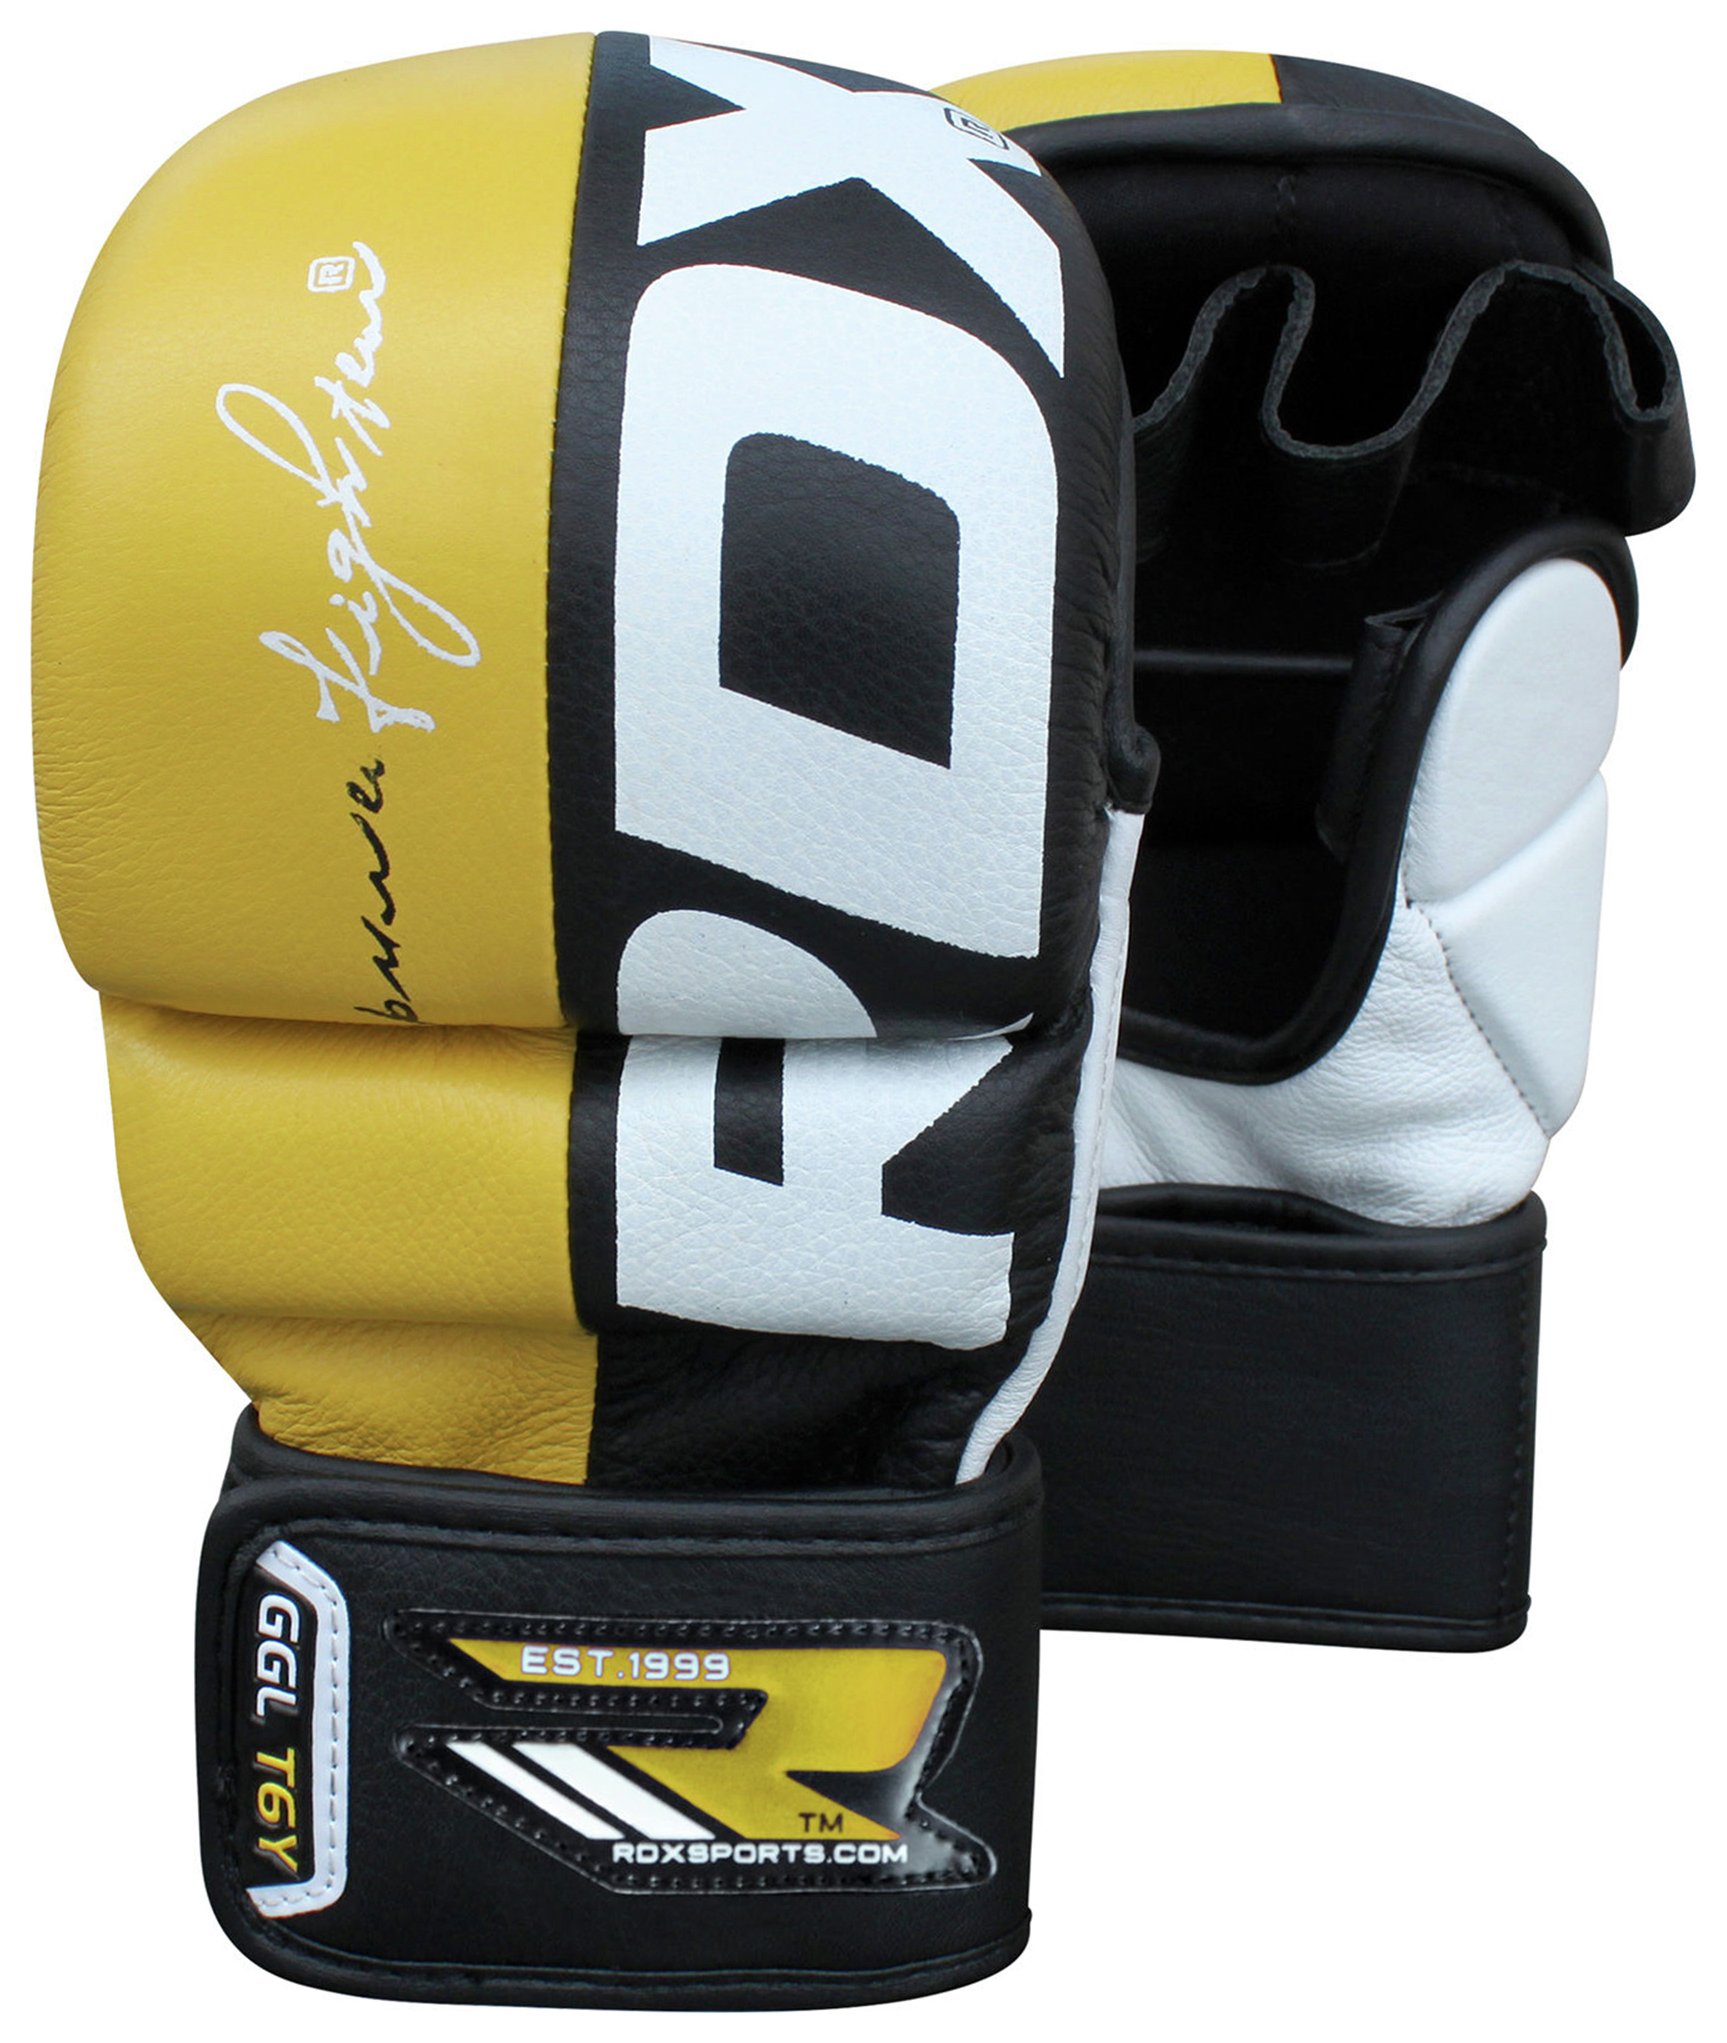 RDX Large to XLarge Mixed Martial Arts Gloves - Yellow.